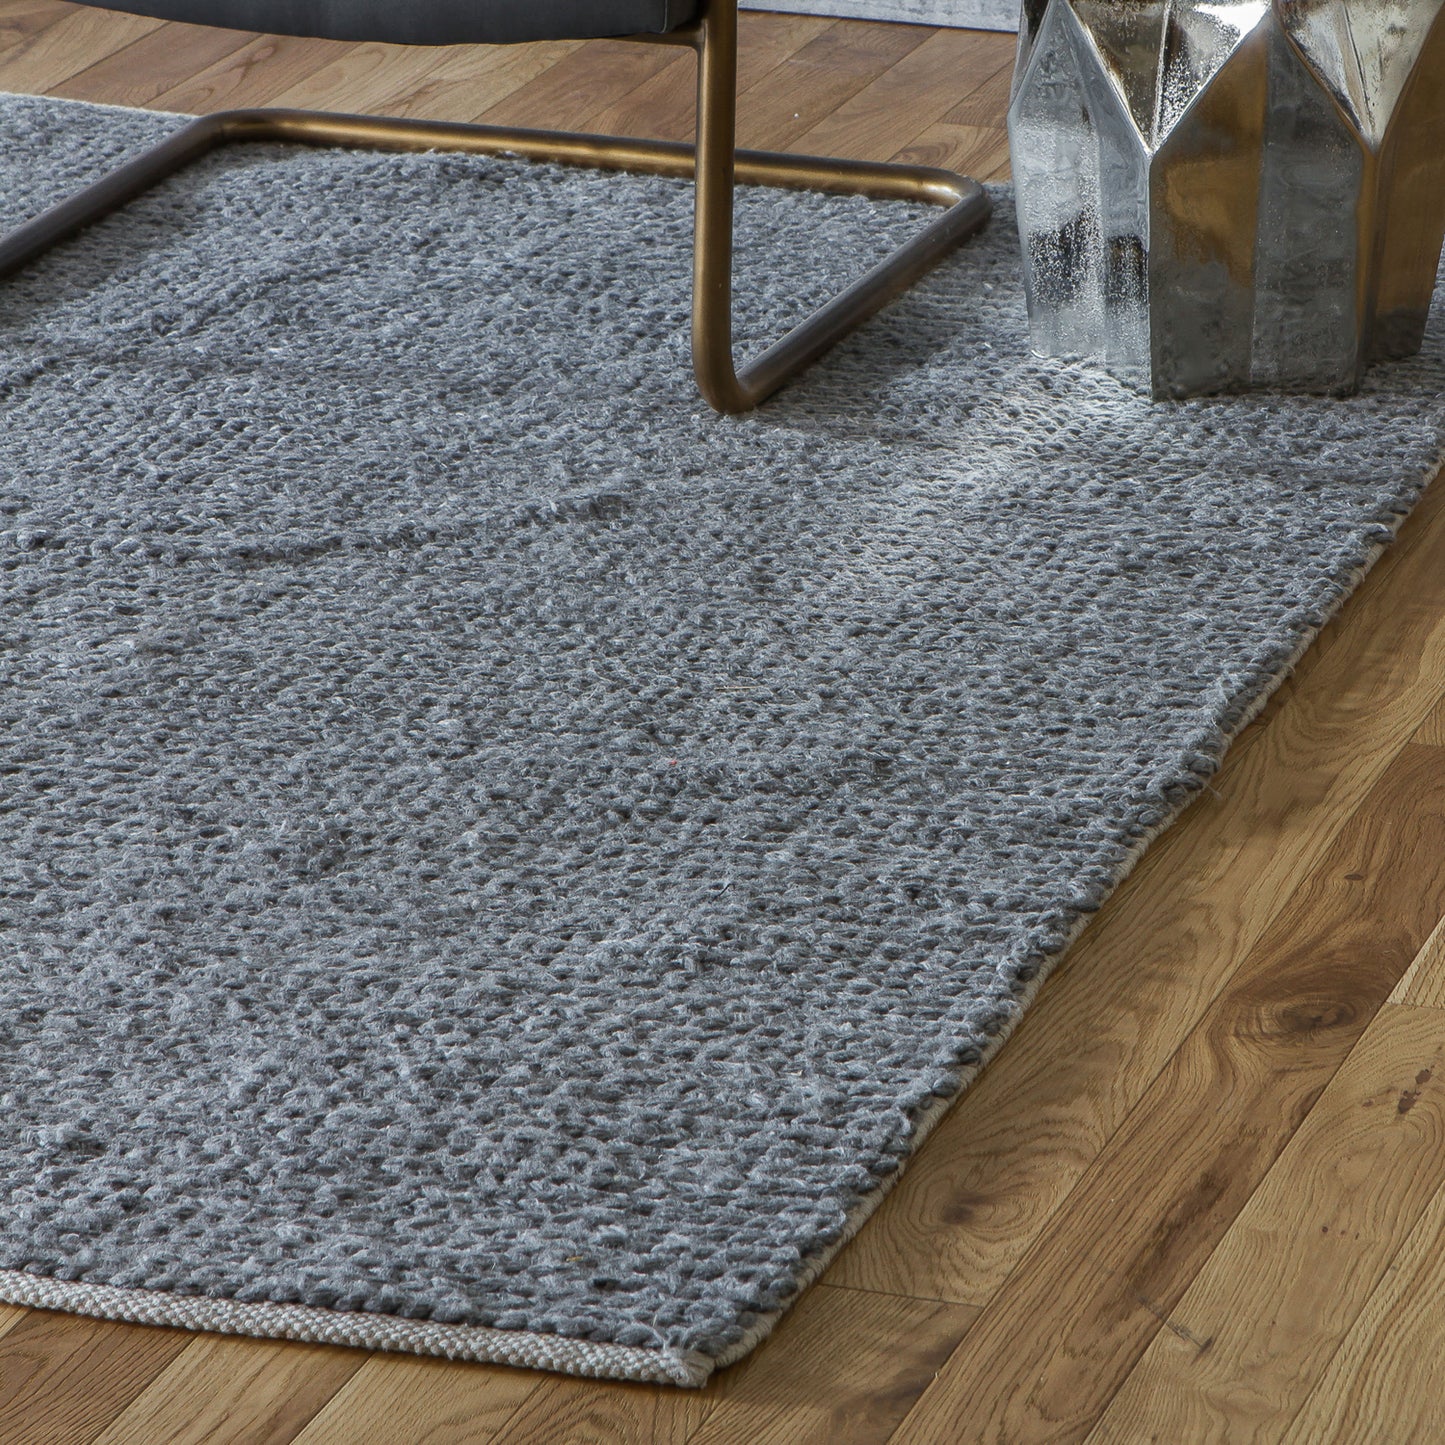 An Imperial Rug Grey 1600x2300mm from Kikiathome.co.uk, perfect for interior decor on a wooden floor.